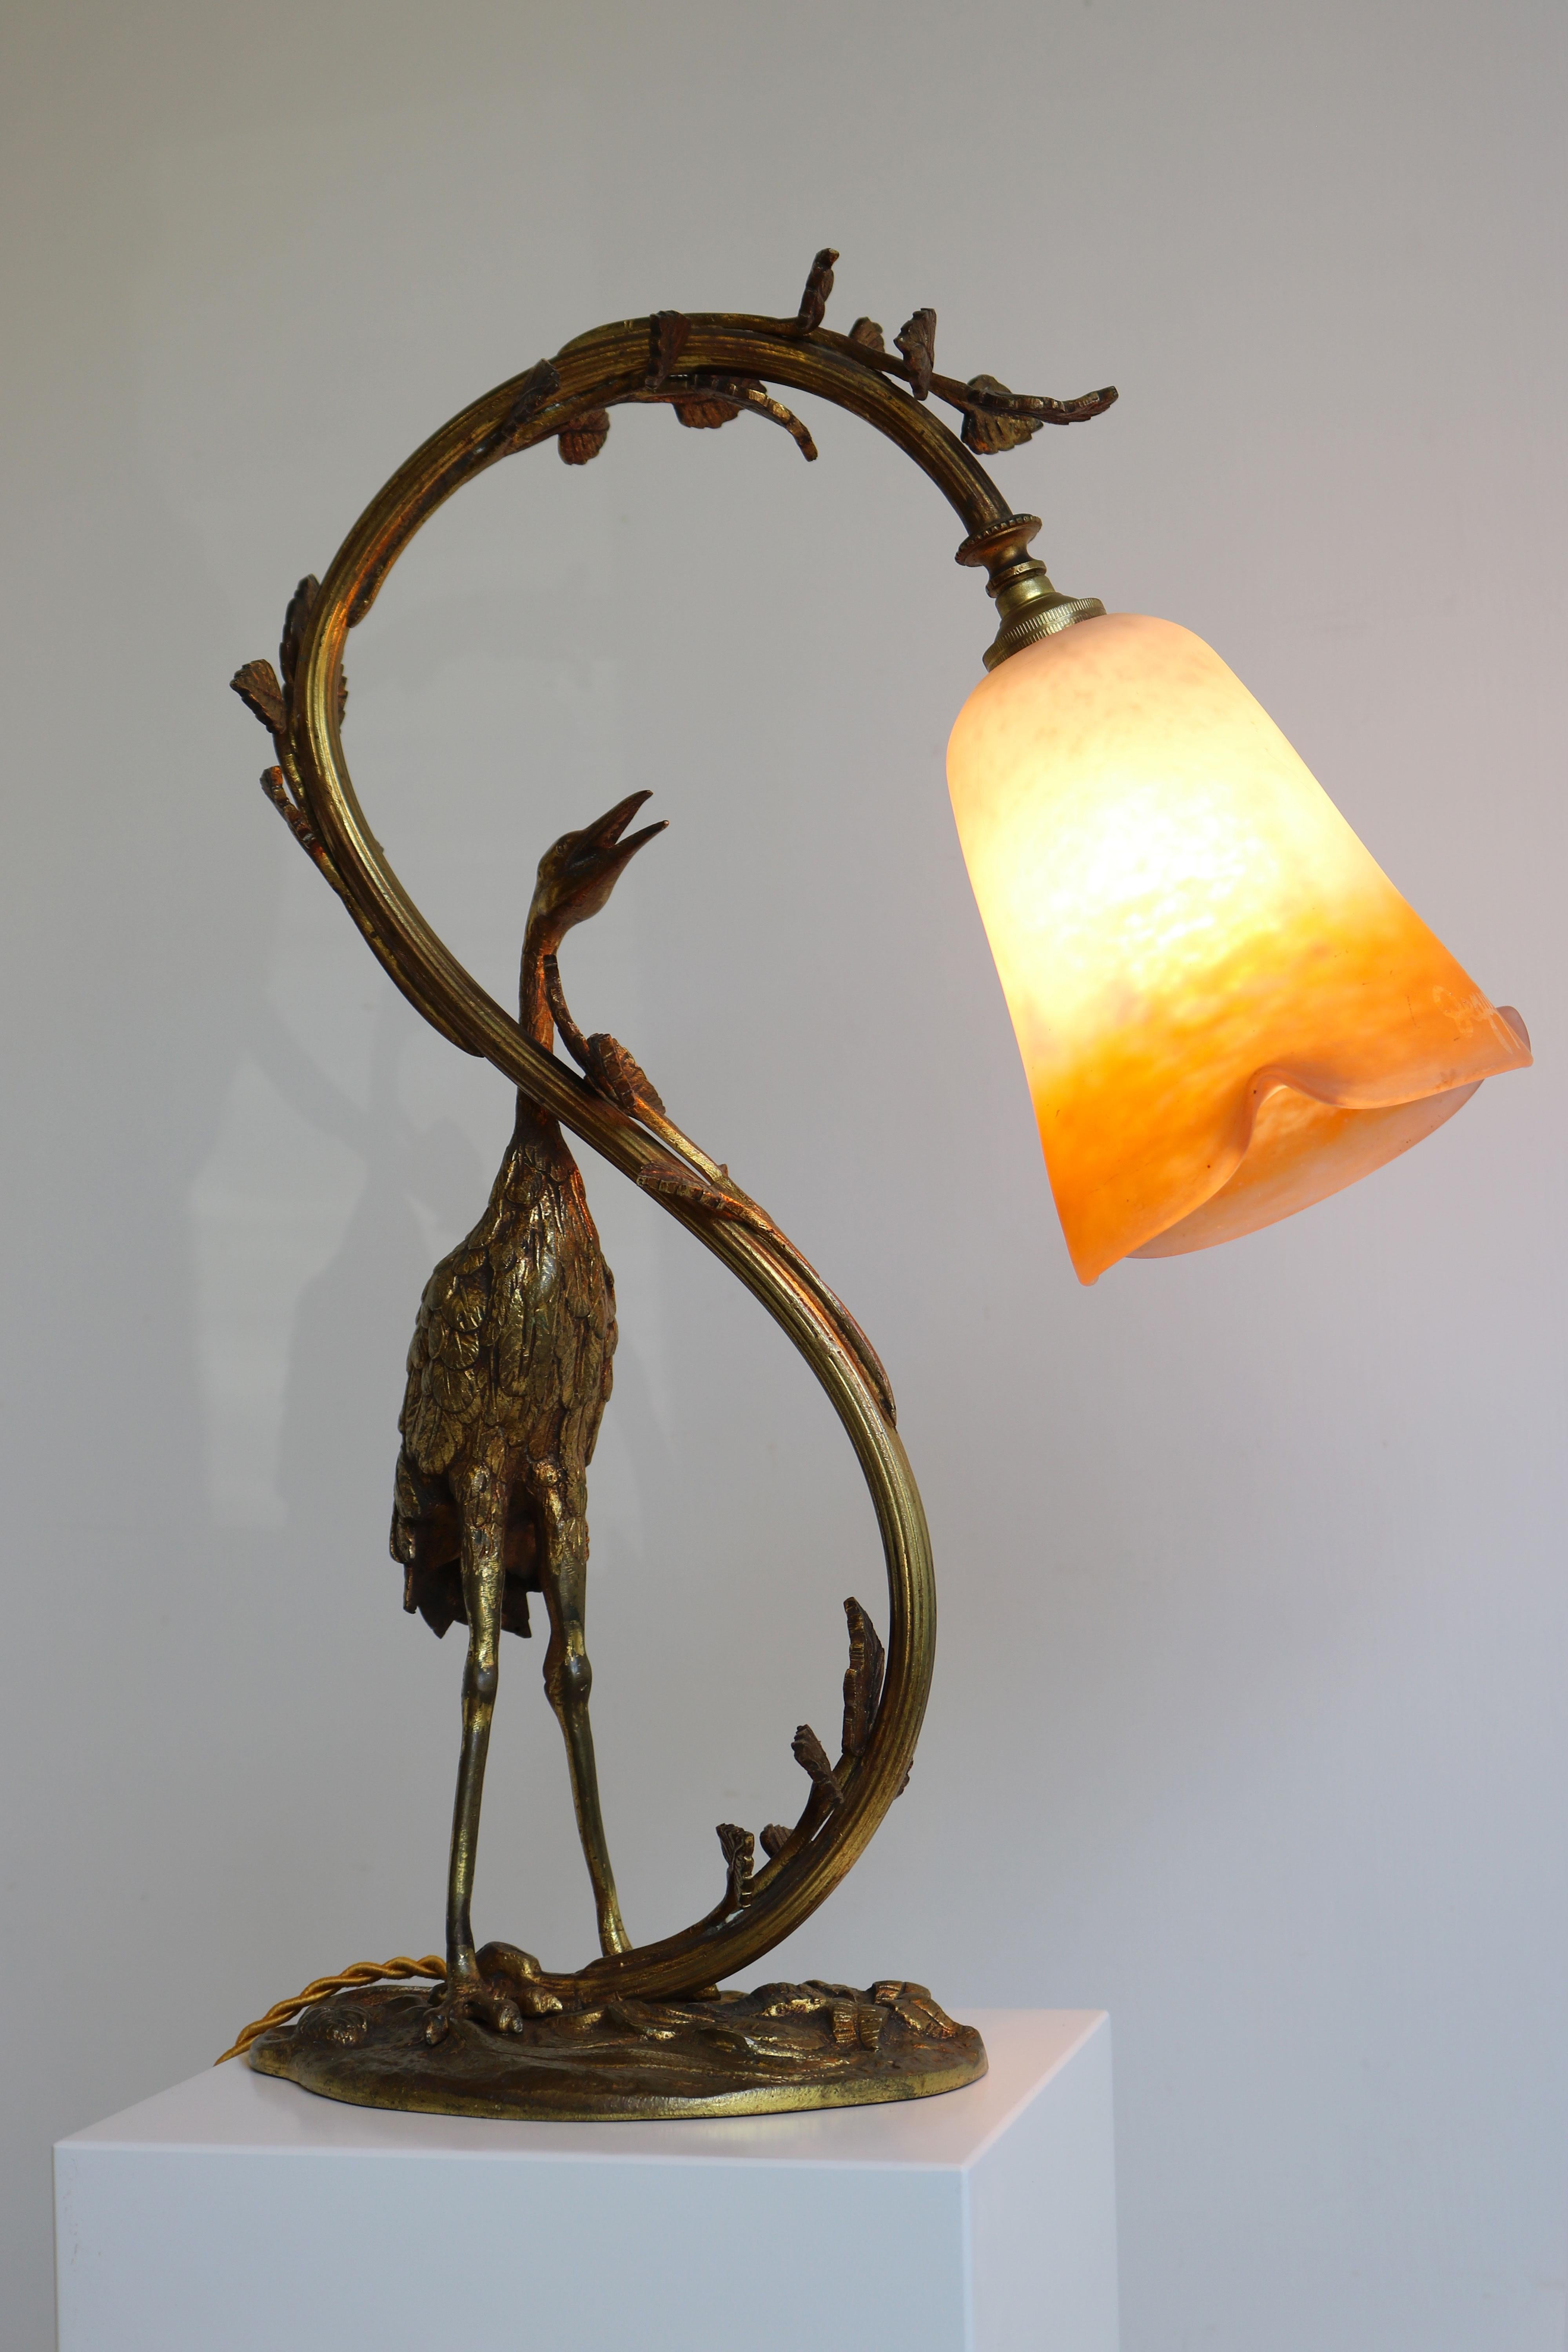 Hand-Crafted Antique French Art Nouveau Table Lamp Heron by Degue 1920 Pate De Verre Bronze  For Sale